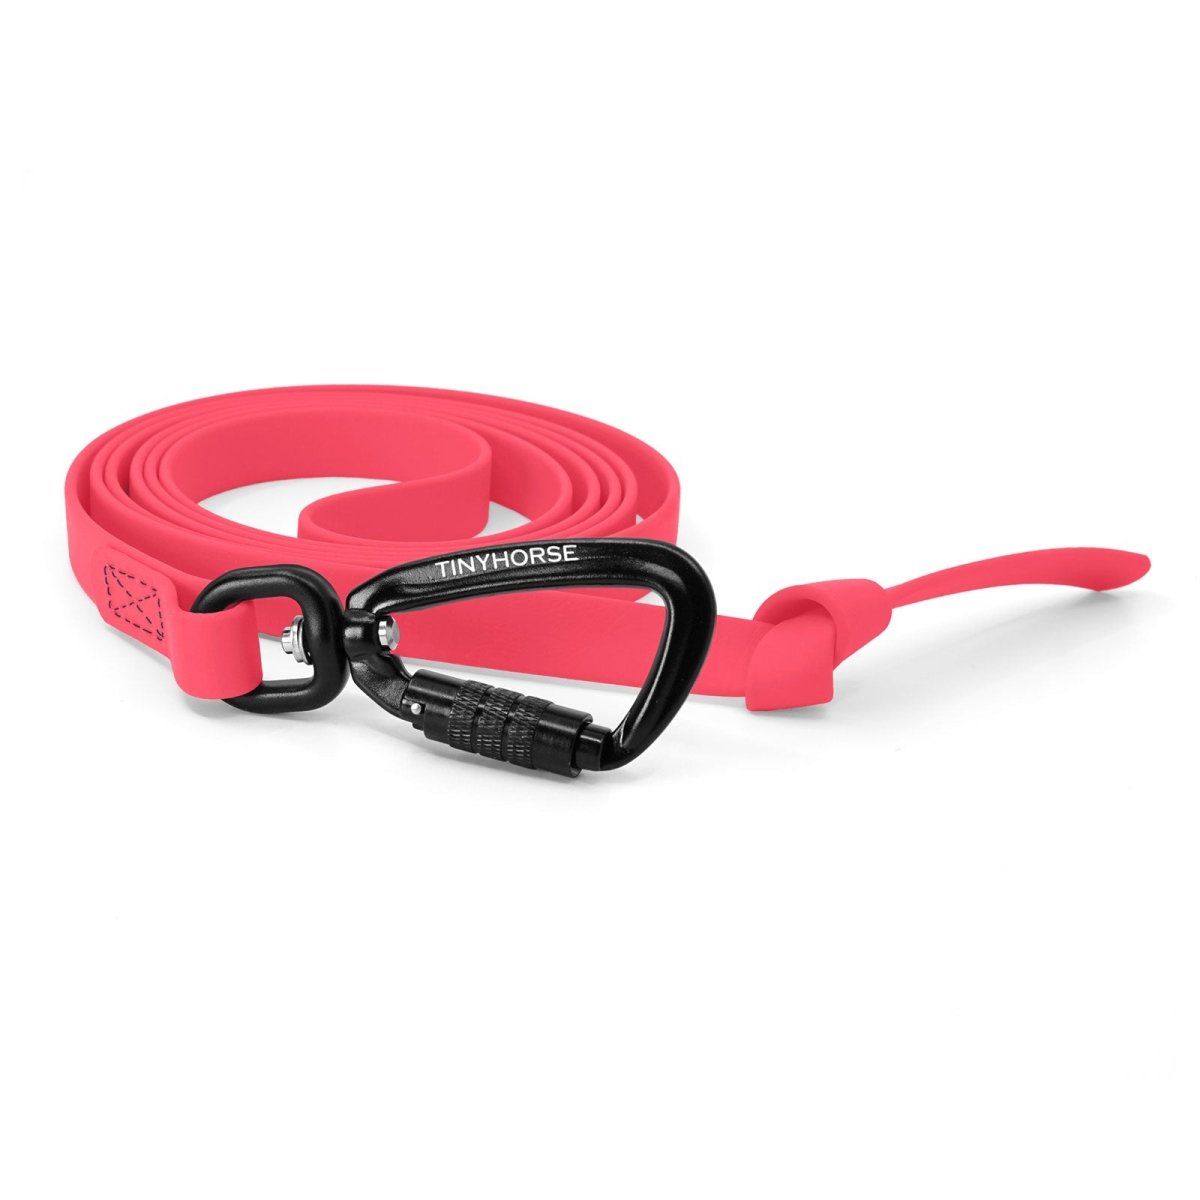 A neon pink-coloured Step Line made of BioThane and 2 auto-locking carabiners